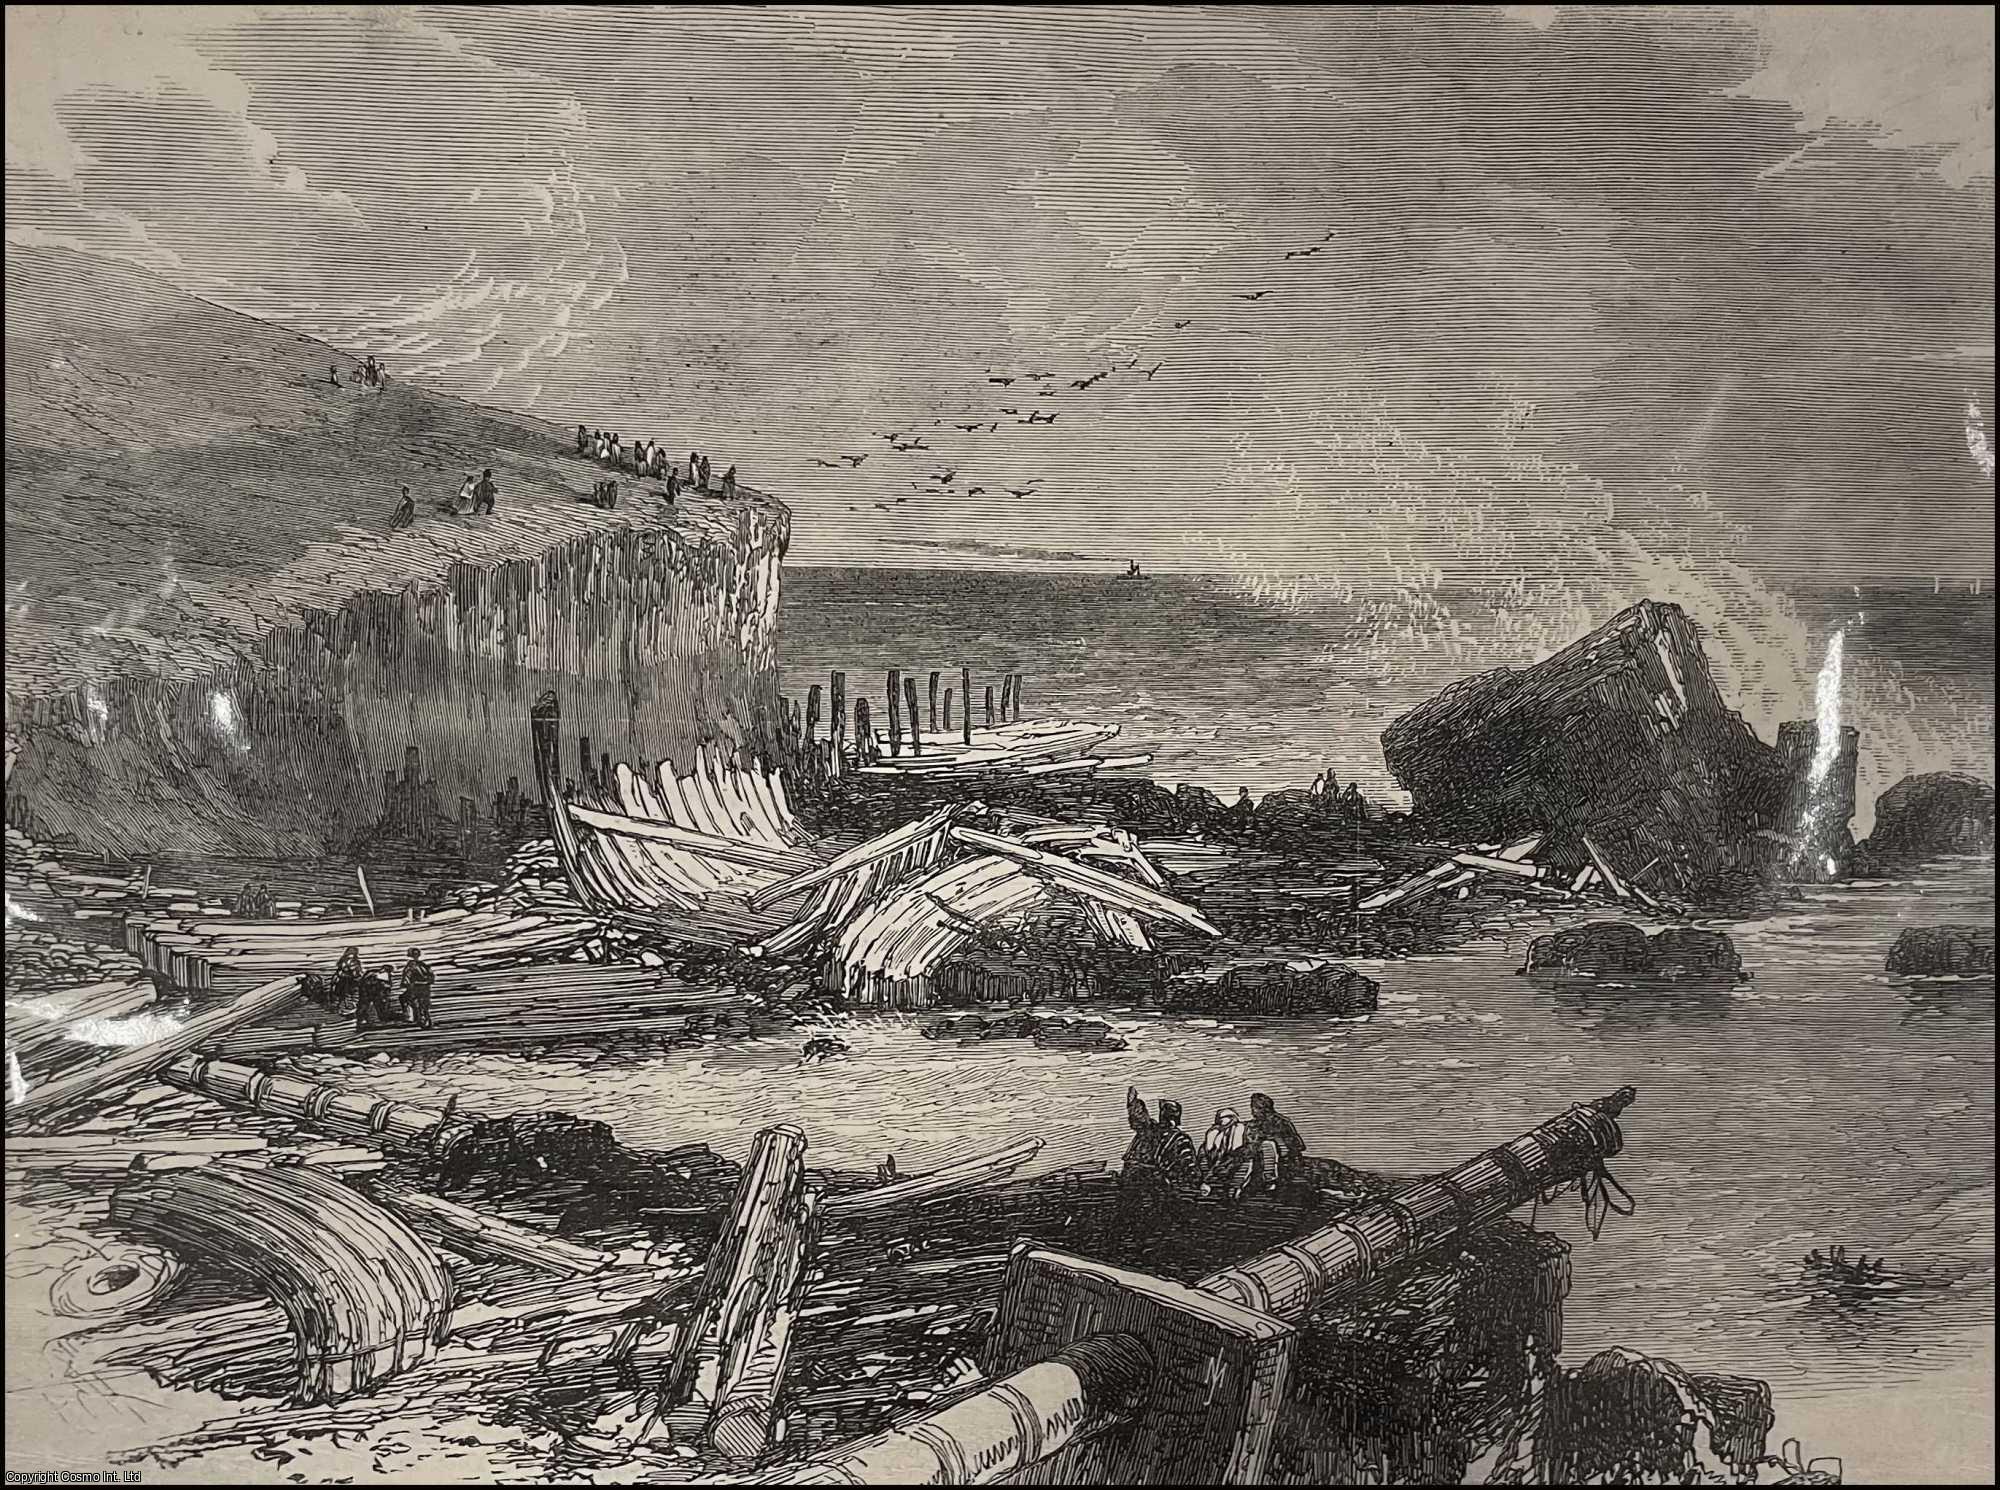 SHIPPING ACCIDENT - Remains of the Ship Eugenie, wrecked in Ballymacotter Bay, Ireland. An original print from the Illustrated London News, 1866.